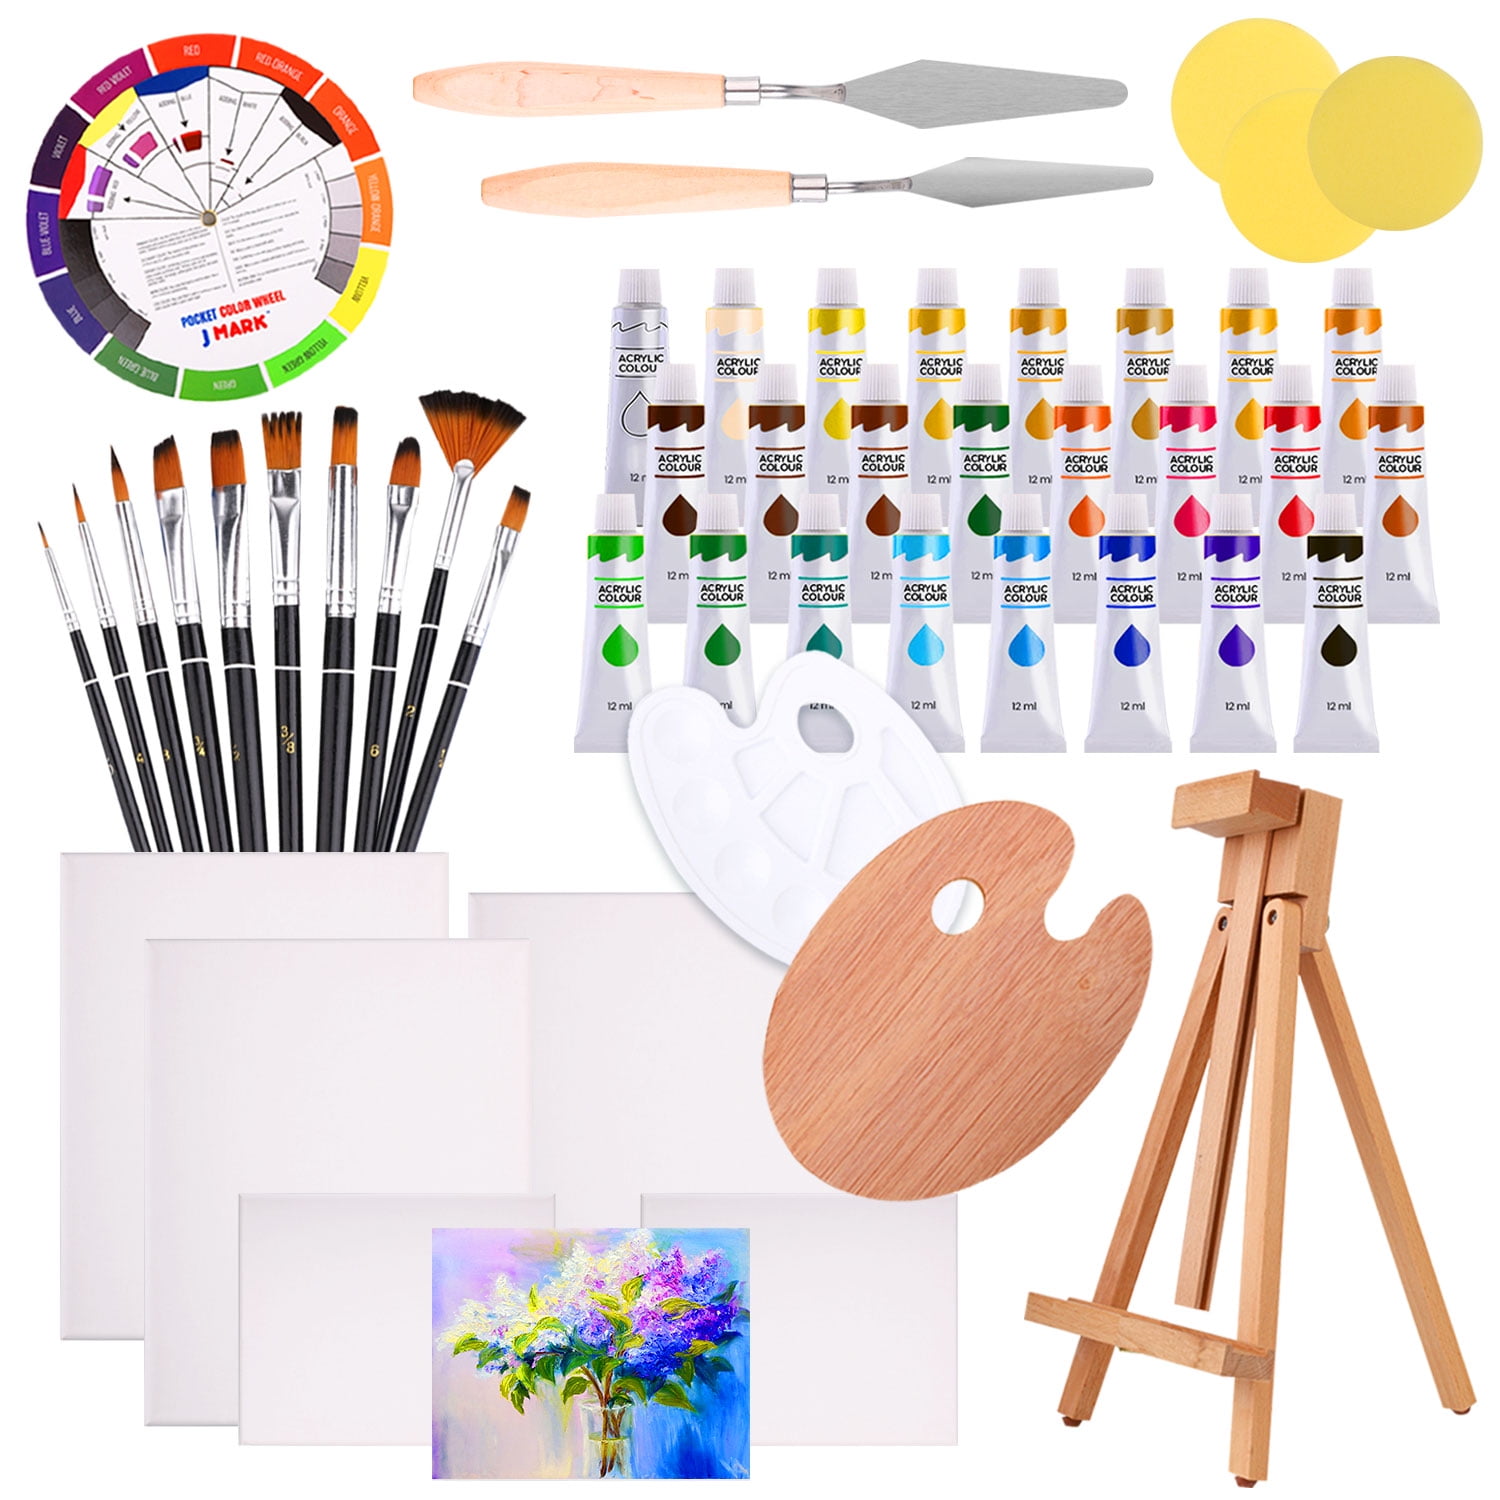 Acrylic and Watercolor Paint Set Supplies –40-Piece Art Canvas Painting Kit  for Adults Includes Wood Easel 2 Canvases 8x10 inch, 24 Non-Toxic Washable  Paints, 8 Brushes,2 Palettes, Color Mixing Guide 